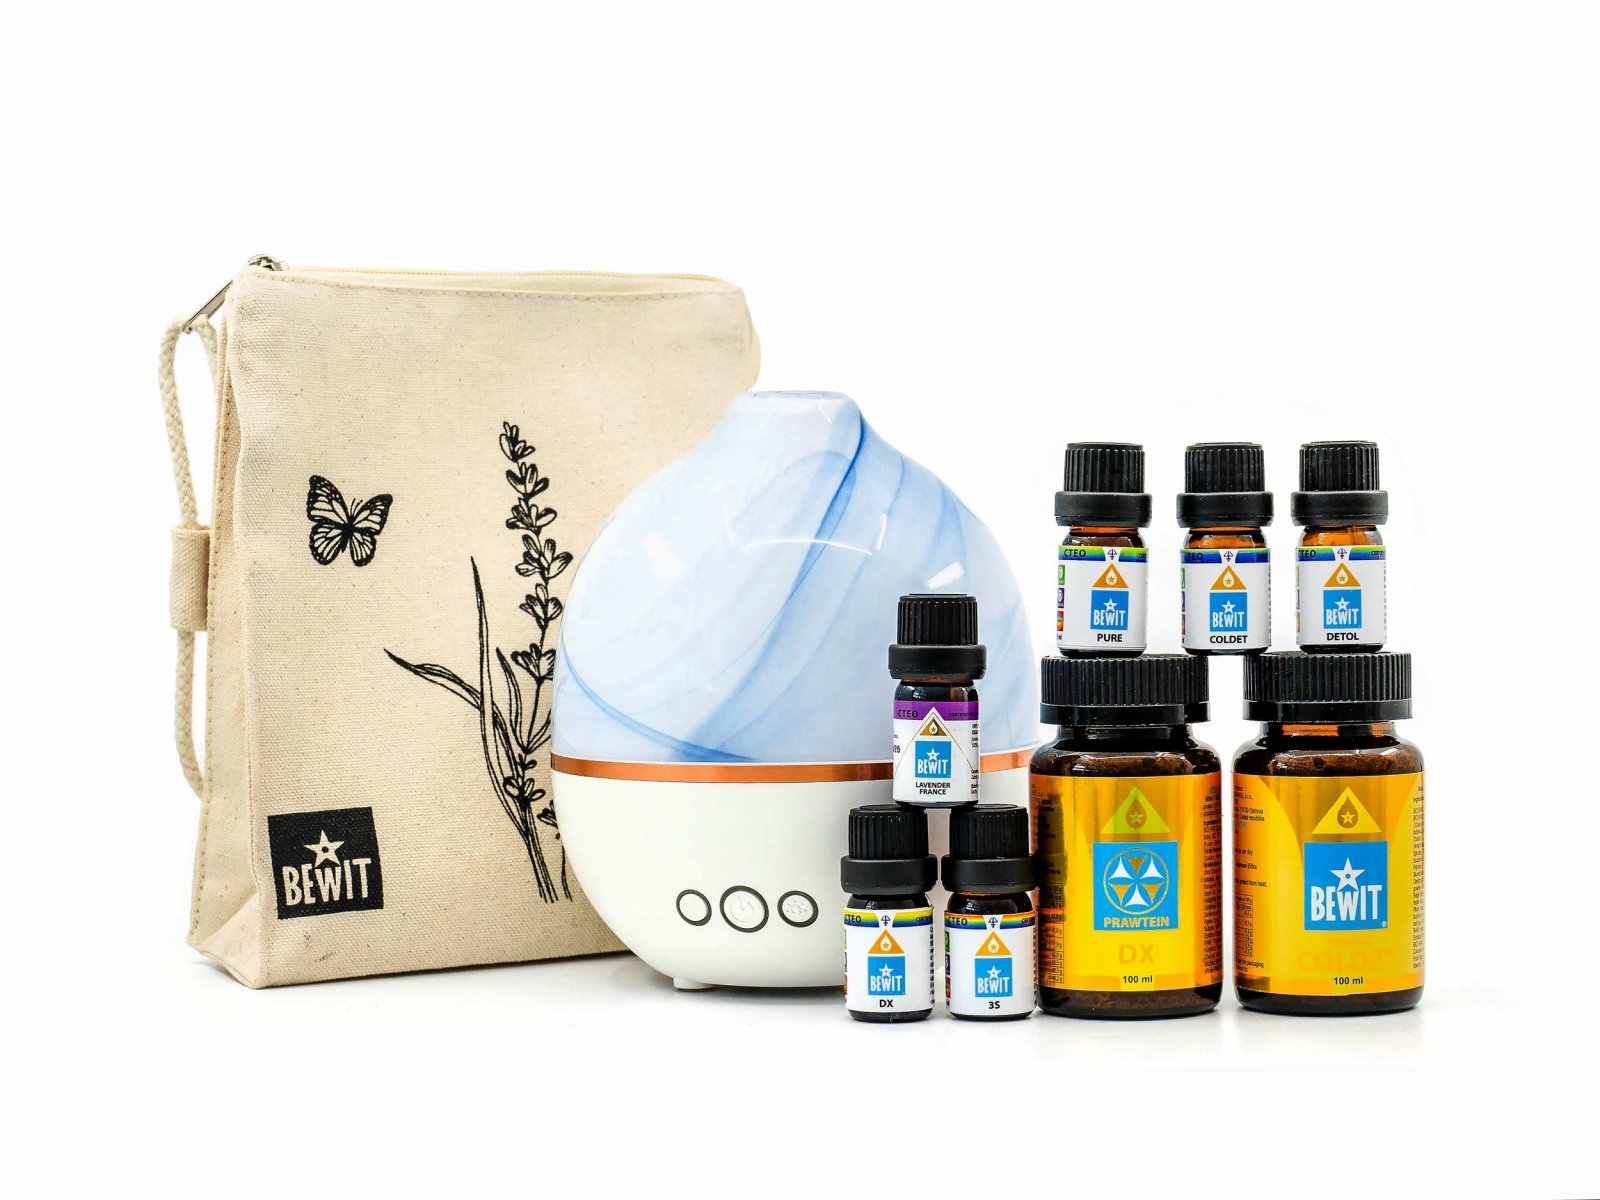 BEWIT Detox with diffuser - BEWIT Set